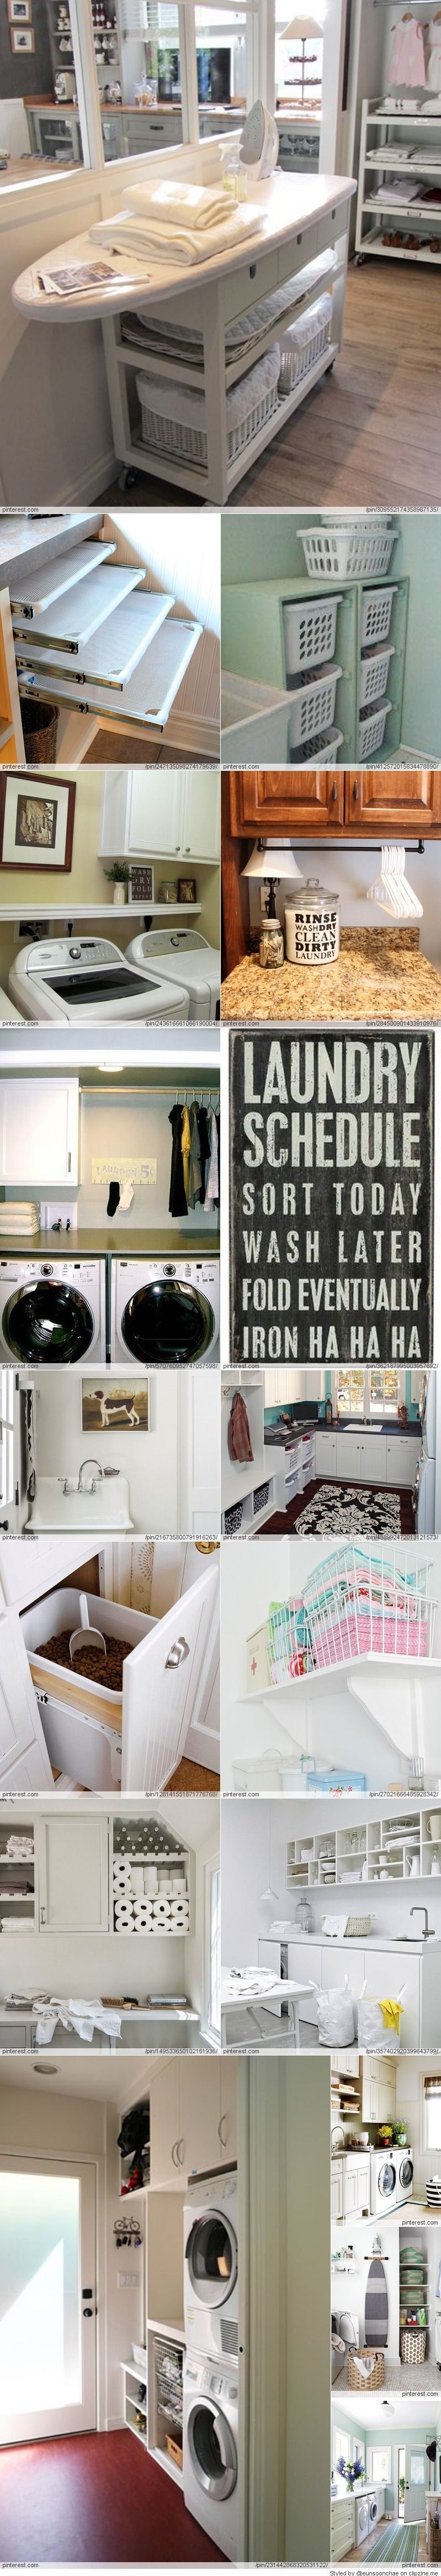 Laundry Room Ideas-like the ironing board idea-maybe with current kitchen